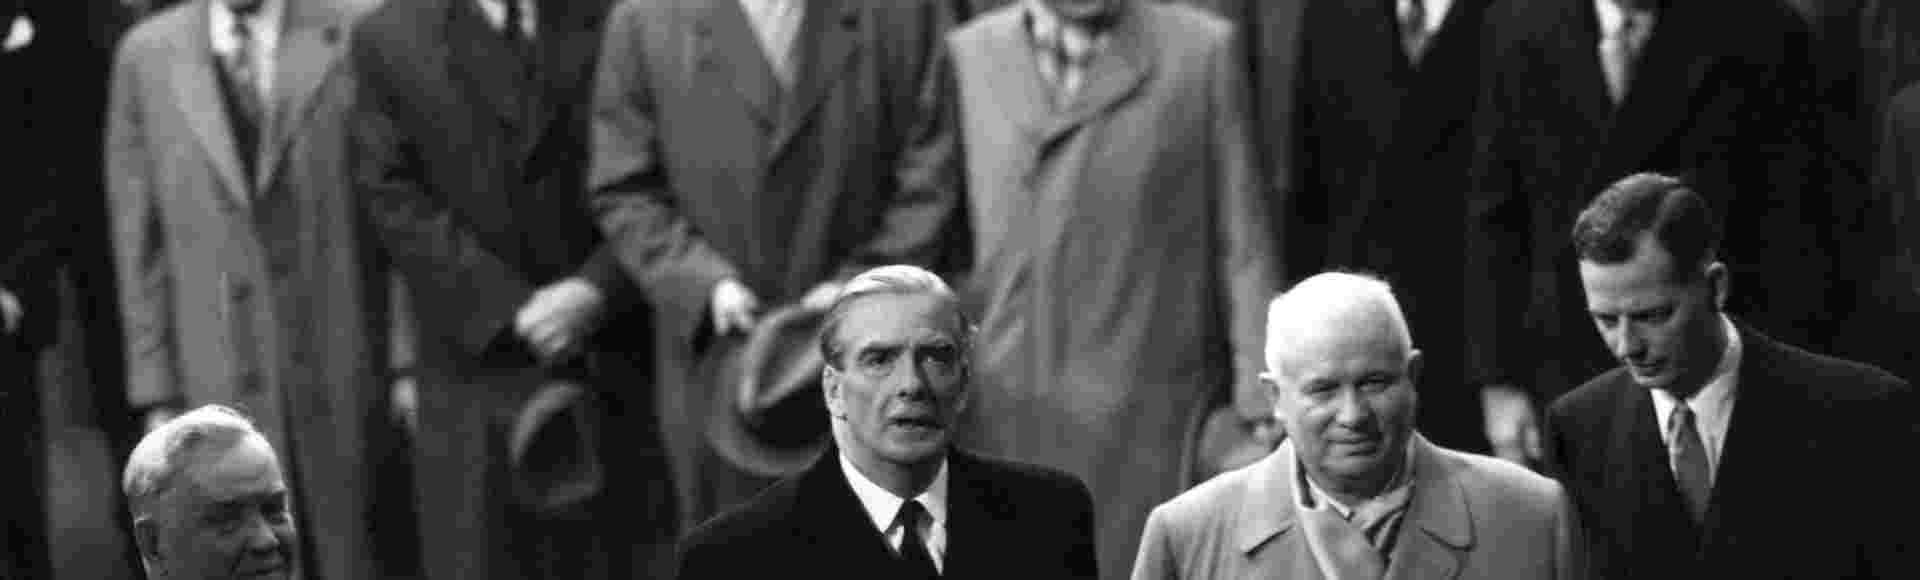 Prime Minister Sir Anthony Eden at Victoria Station in London to meet Marshal Nikolai Bulganin (left), chairman of the Council of Ministers of the USSR, and Nikita Krushchev, First Secretary of the Soviet Communist Party.